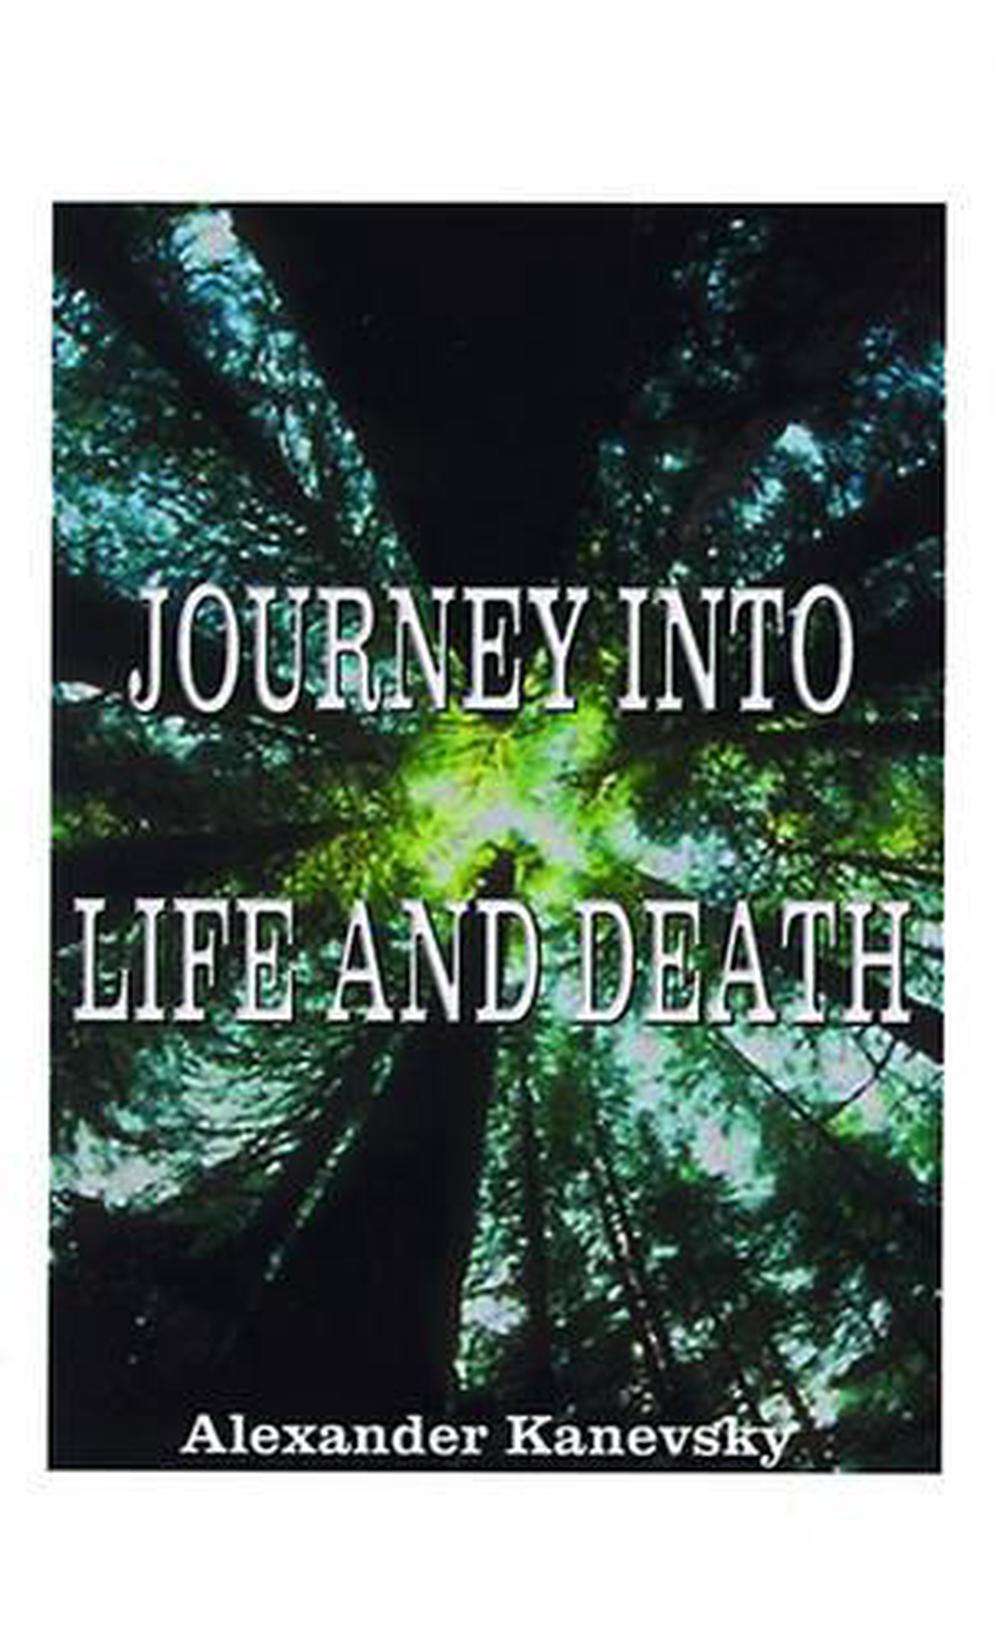 the essential journey of life and death